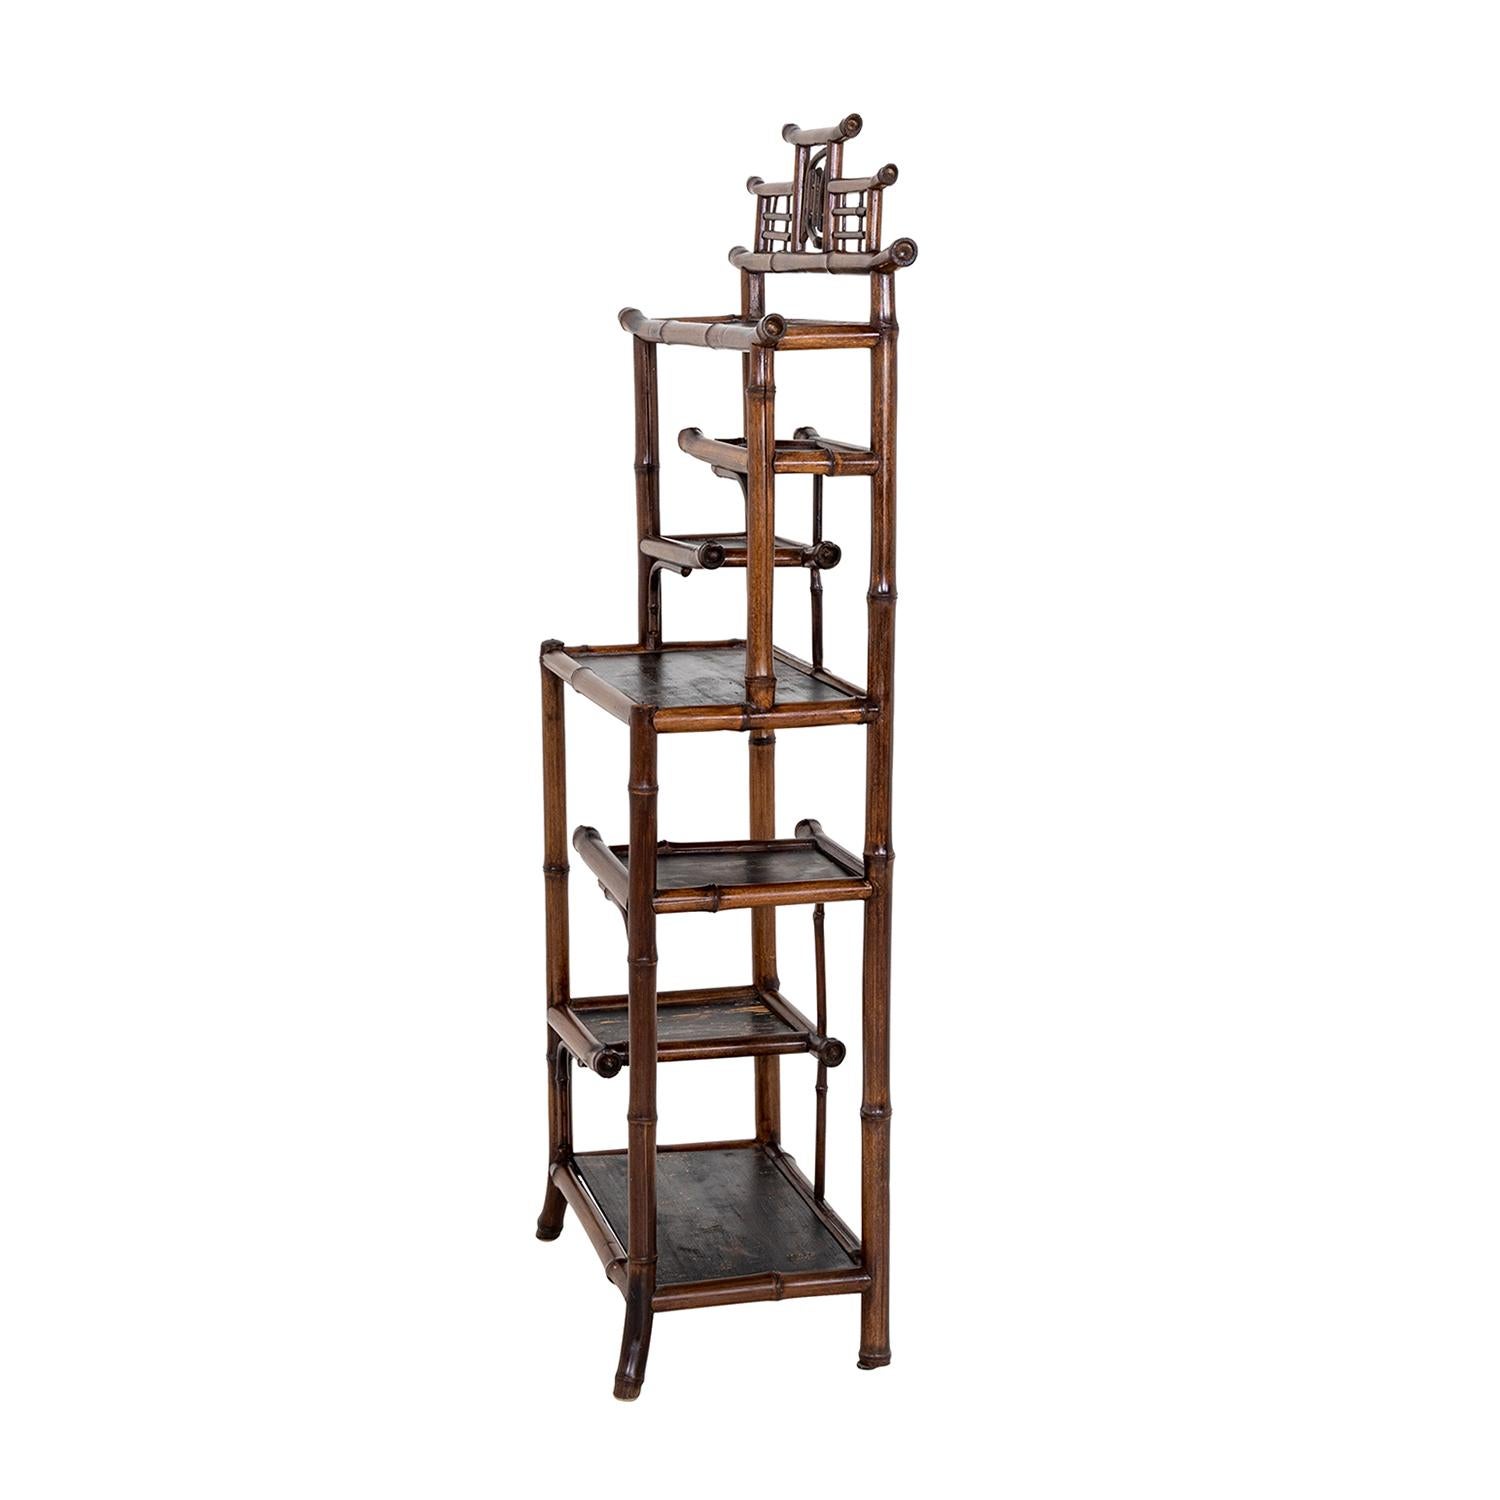 20th Century French Bamboo Book Shelving - Vintage Wall Rack, Unit In Good Condition For Sale In West Palm Beach, FL